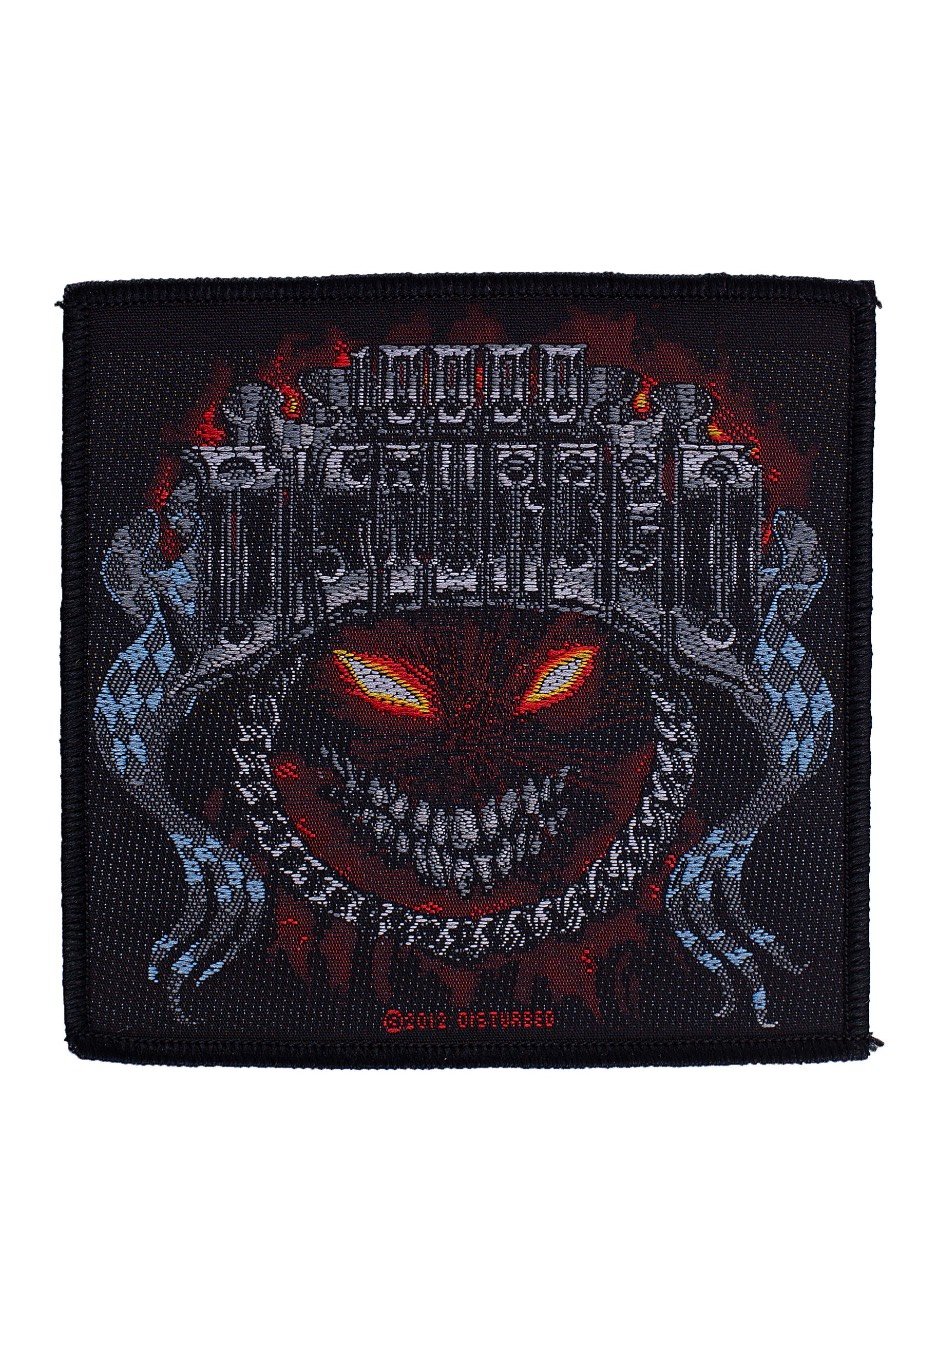 Disturbed - Chrome Smiley - Patch